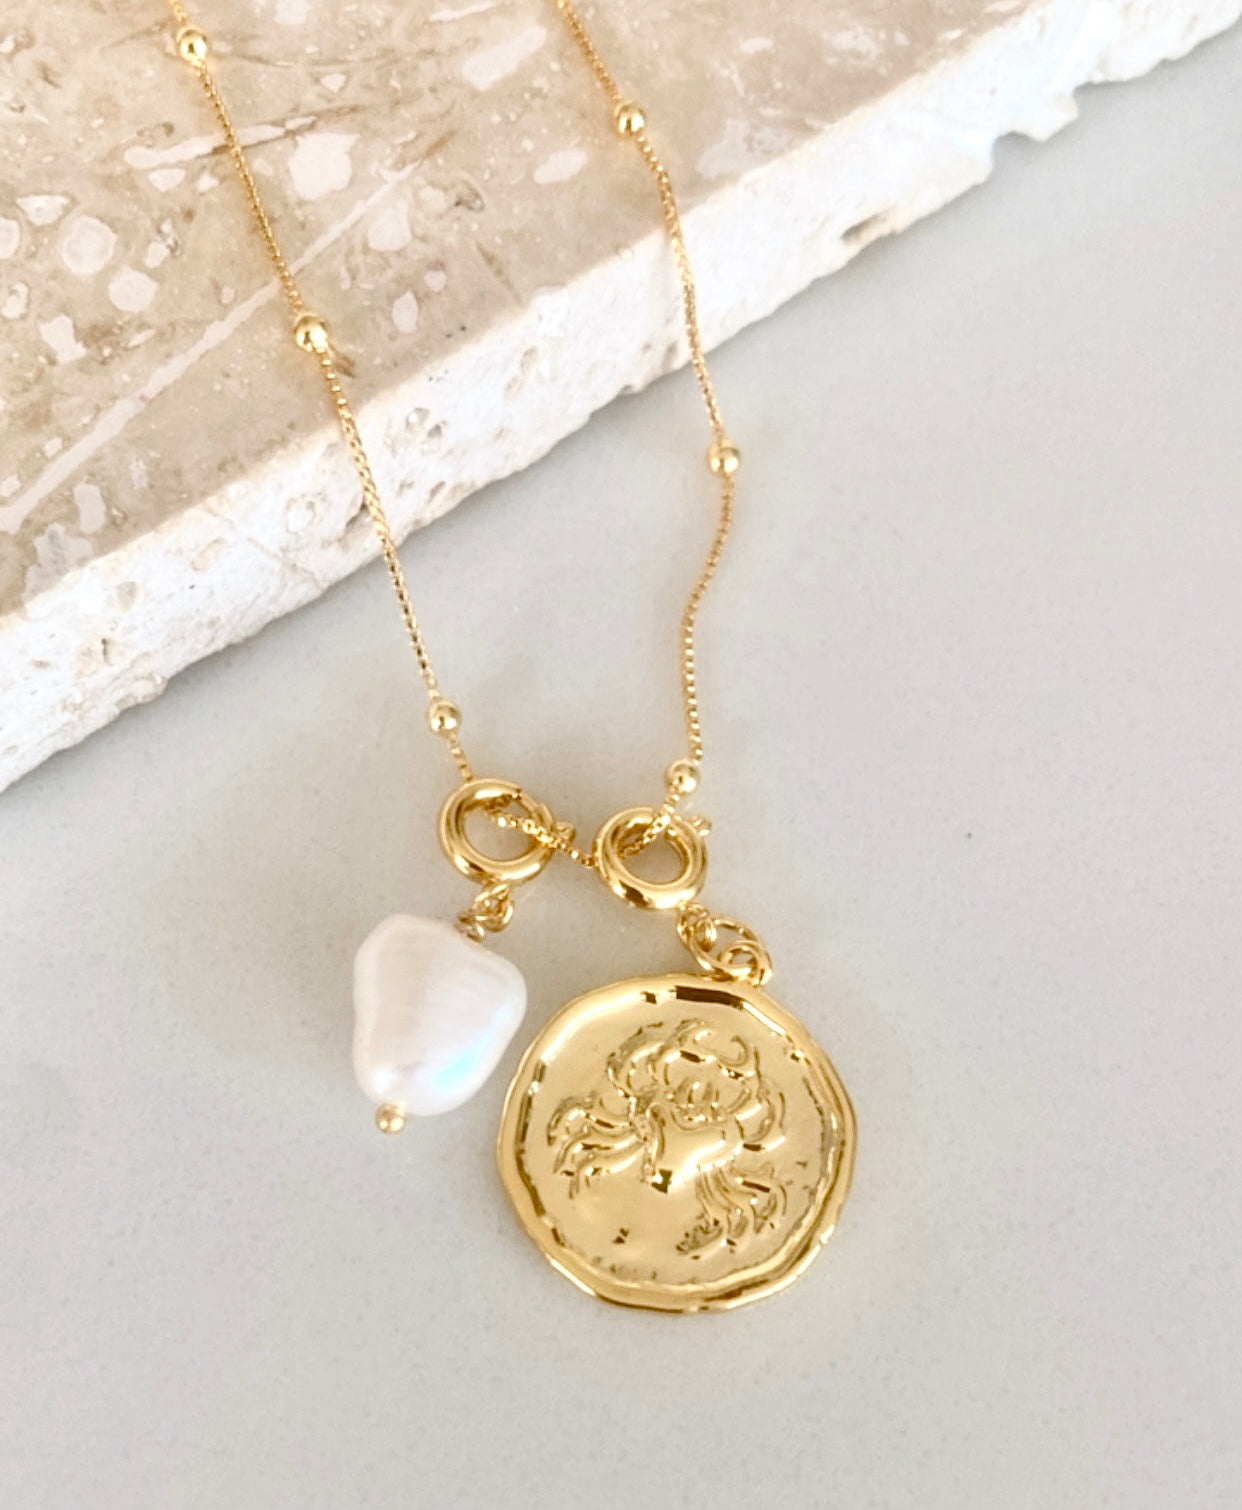 Zodiac with Freshwater Pearl - Cancer June 21 - July 22